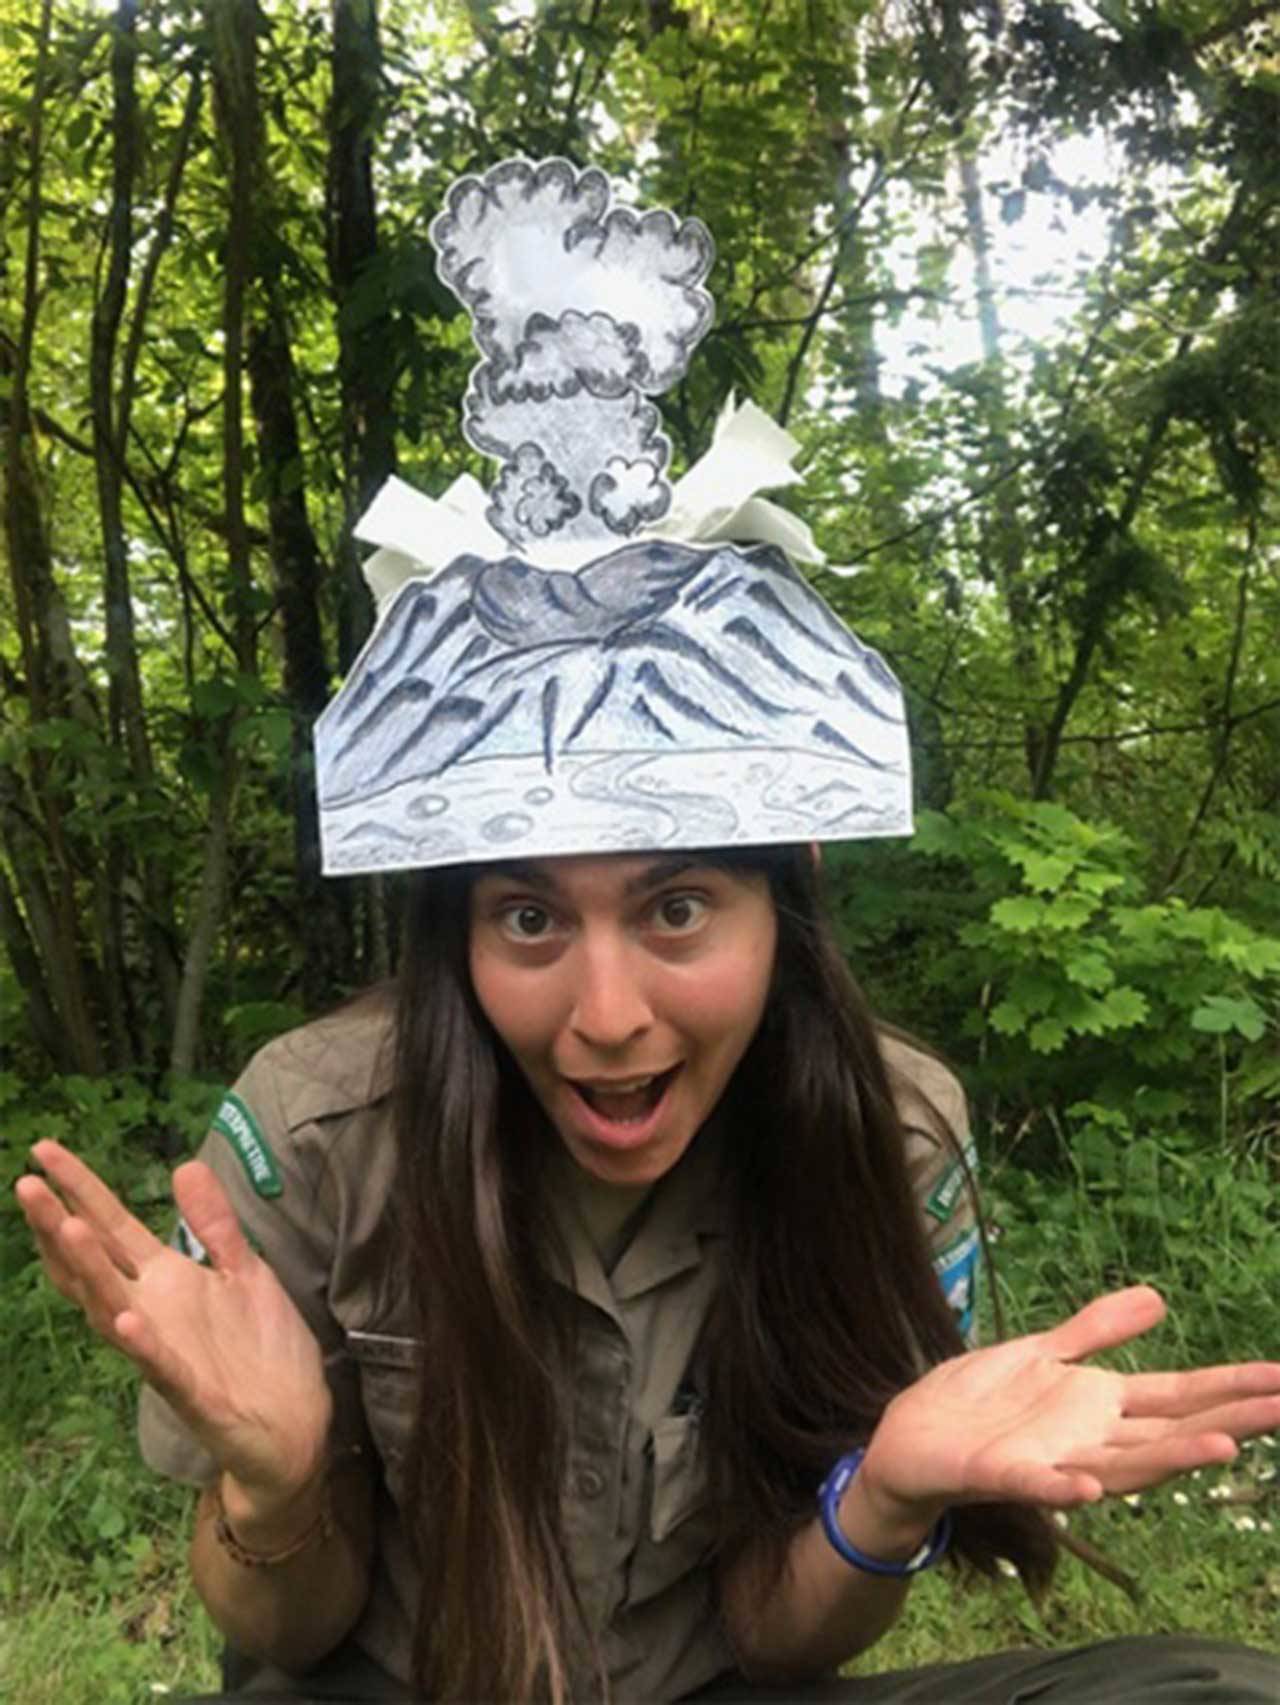 Interpretive Specialist Alysa Adams will give a Mount St. Helens eruption talk and lead a craft for all ages. (Washington State Parks)